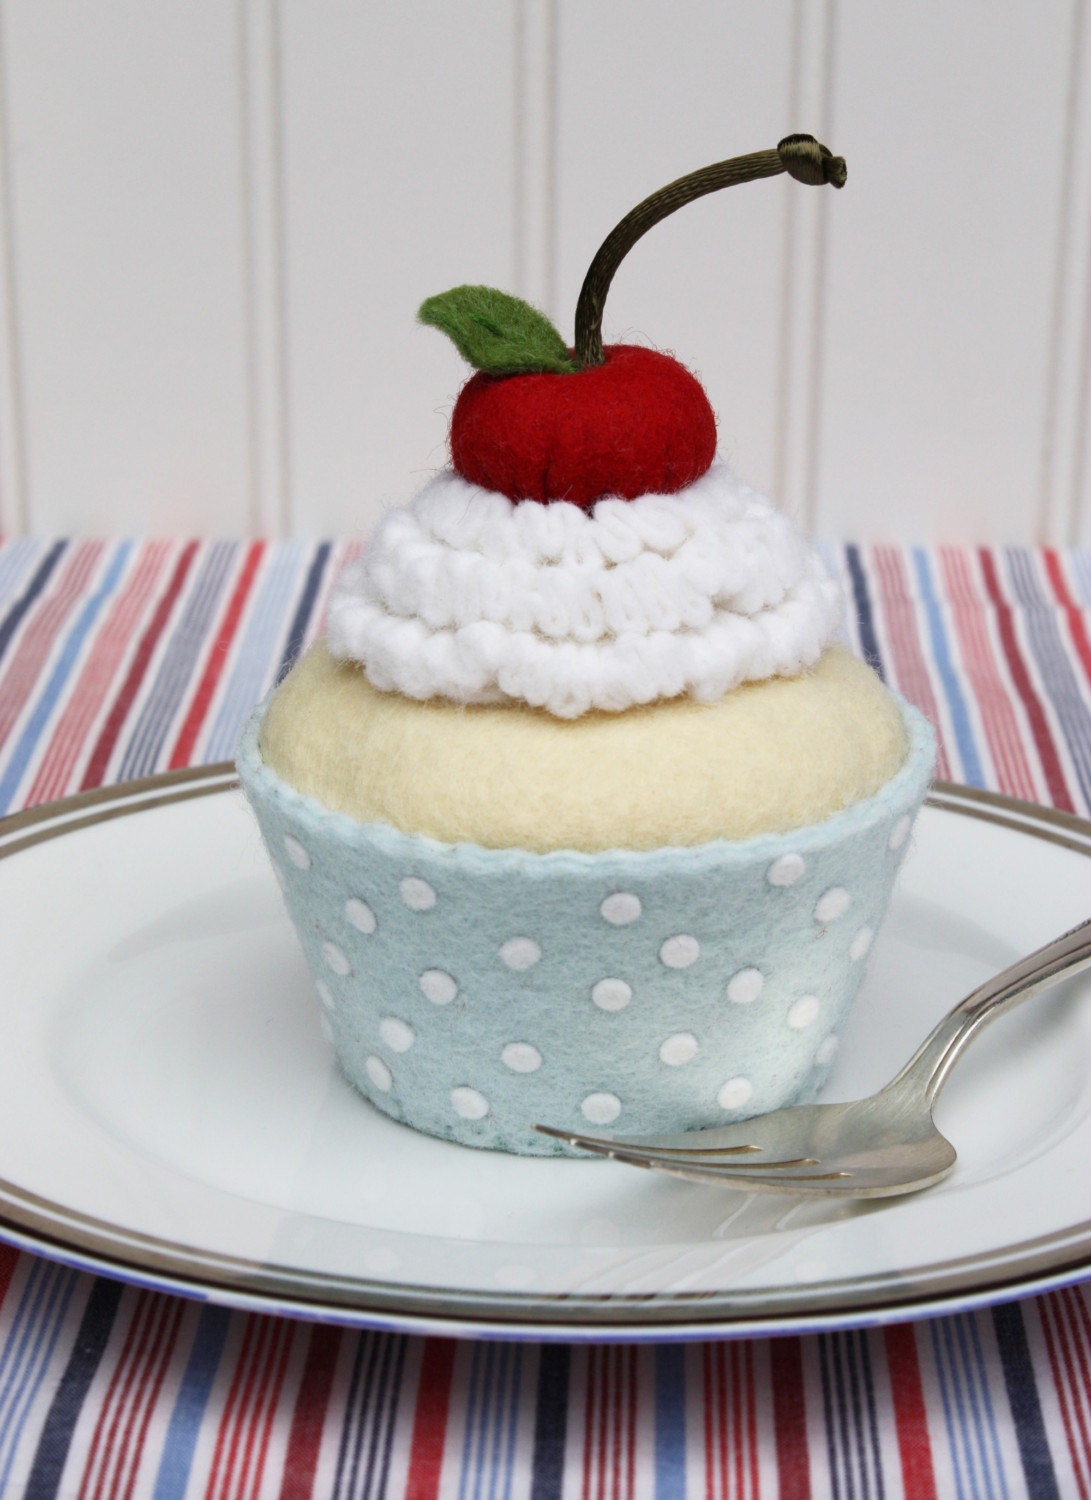 Patriotic Felt Cupcake With White Whipped Cream, Cherry And Blue Liner